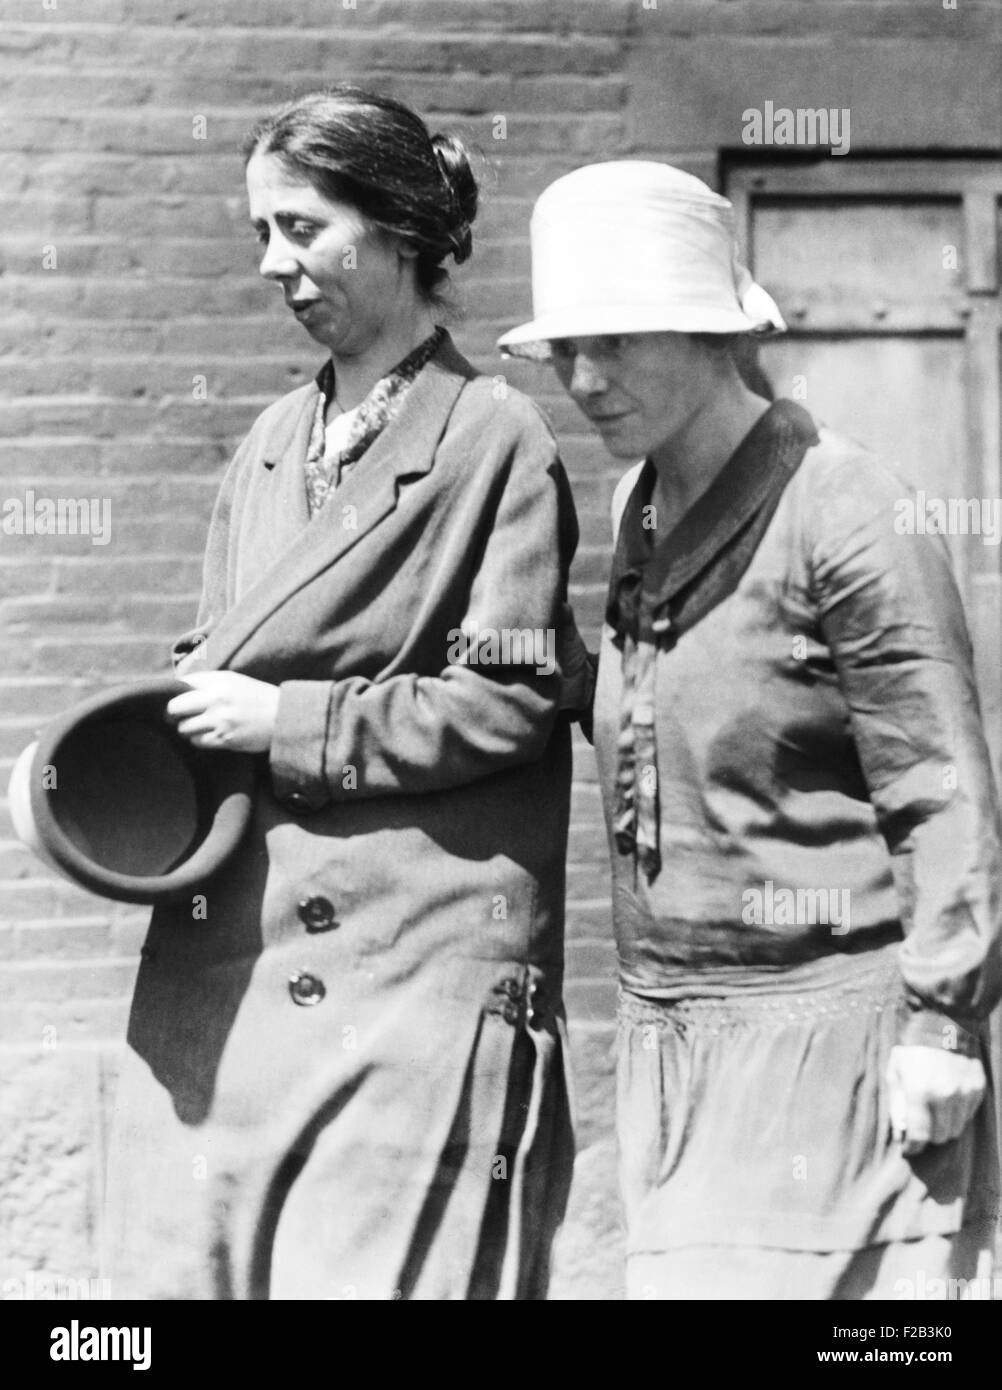 Miss Luigia Vanzetti, (left) is shown leaving the Charlestown State prison with Mrs. Nicola Sacco. Miss Vanzetti is visiting her brother, Bartolomeo in the death house of Massachusetts State Prison, after not seeing him for 19 years. Mrs. Sacco's husband is in the same death house awaiting execution for the murder of a South Braintree shoe factory paymaster and a guard in 1925. Ca. Aug. 1, 1927. - (CSU 2015 5 99) Stock Photo